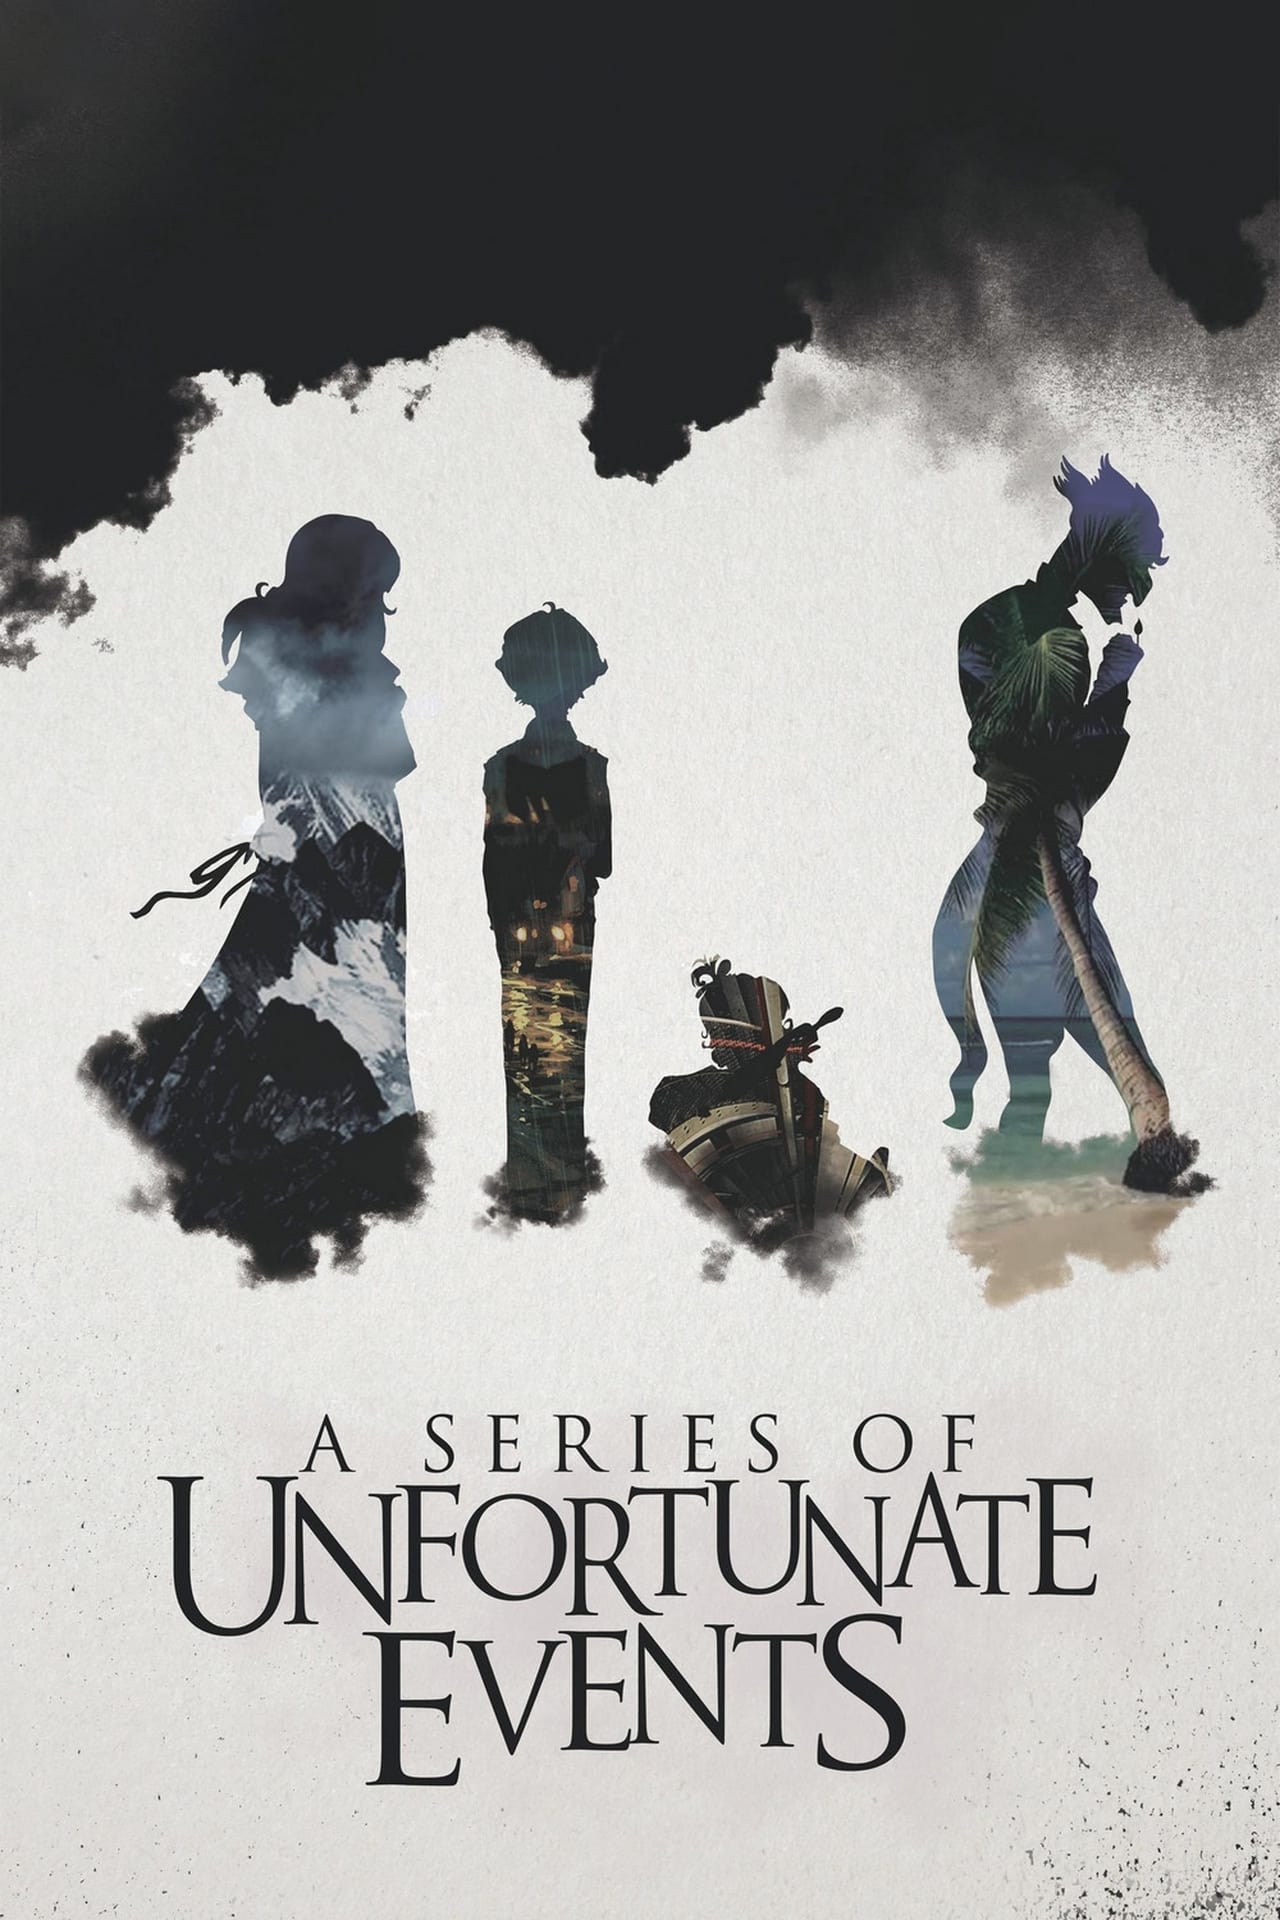 A Series of Unfortunate Events (2018) S2 EP01&EP10 640Kbps 24Fps 48Khz 5.1Ch DD+ NF E-AC3 Turkish Audio TAC